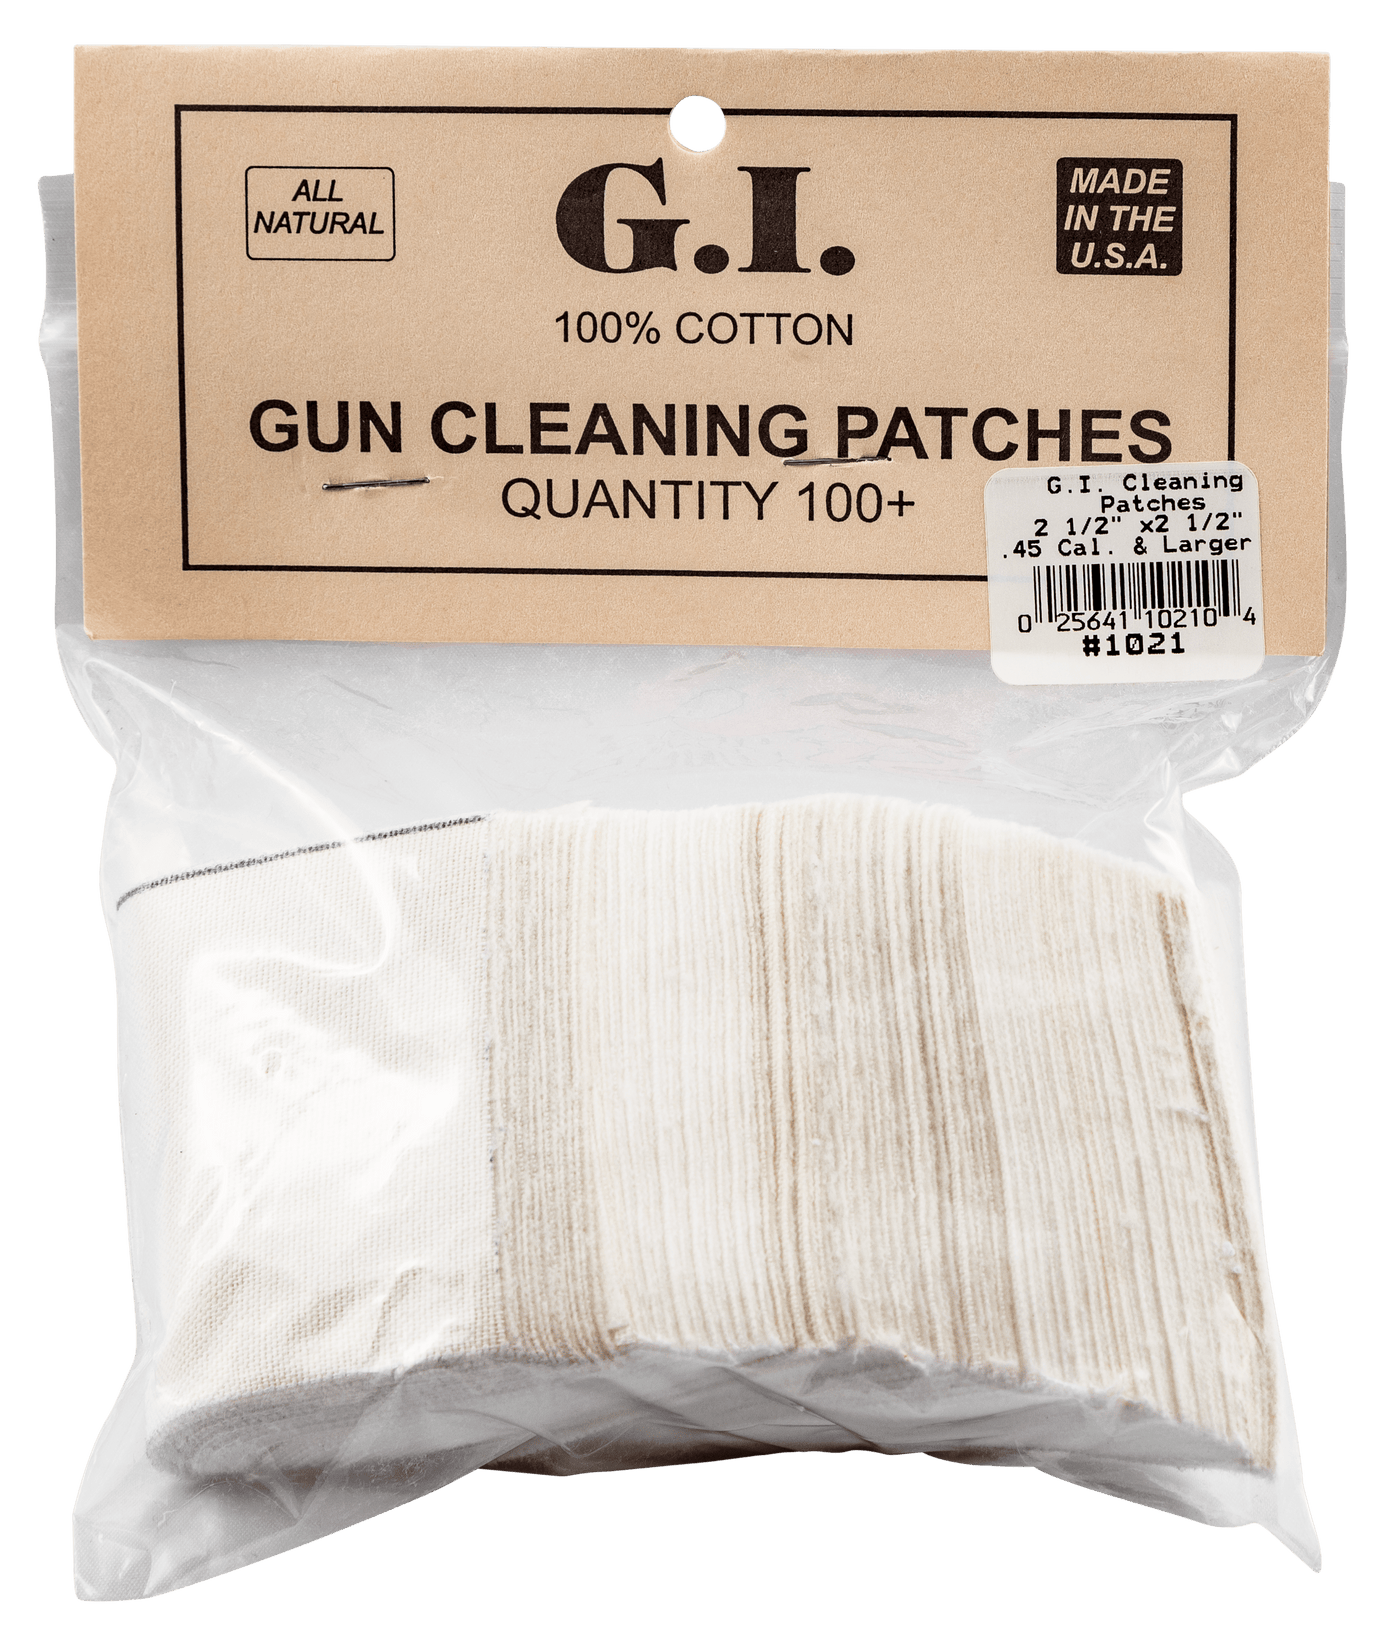 Southern Bloomer Southern Bloomer Cleaning Patches, Sbc 1021 45 Cal Patches          100 Ct Gun Care